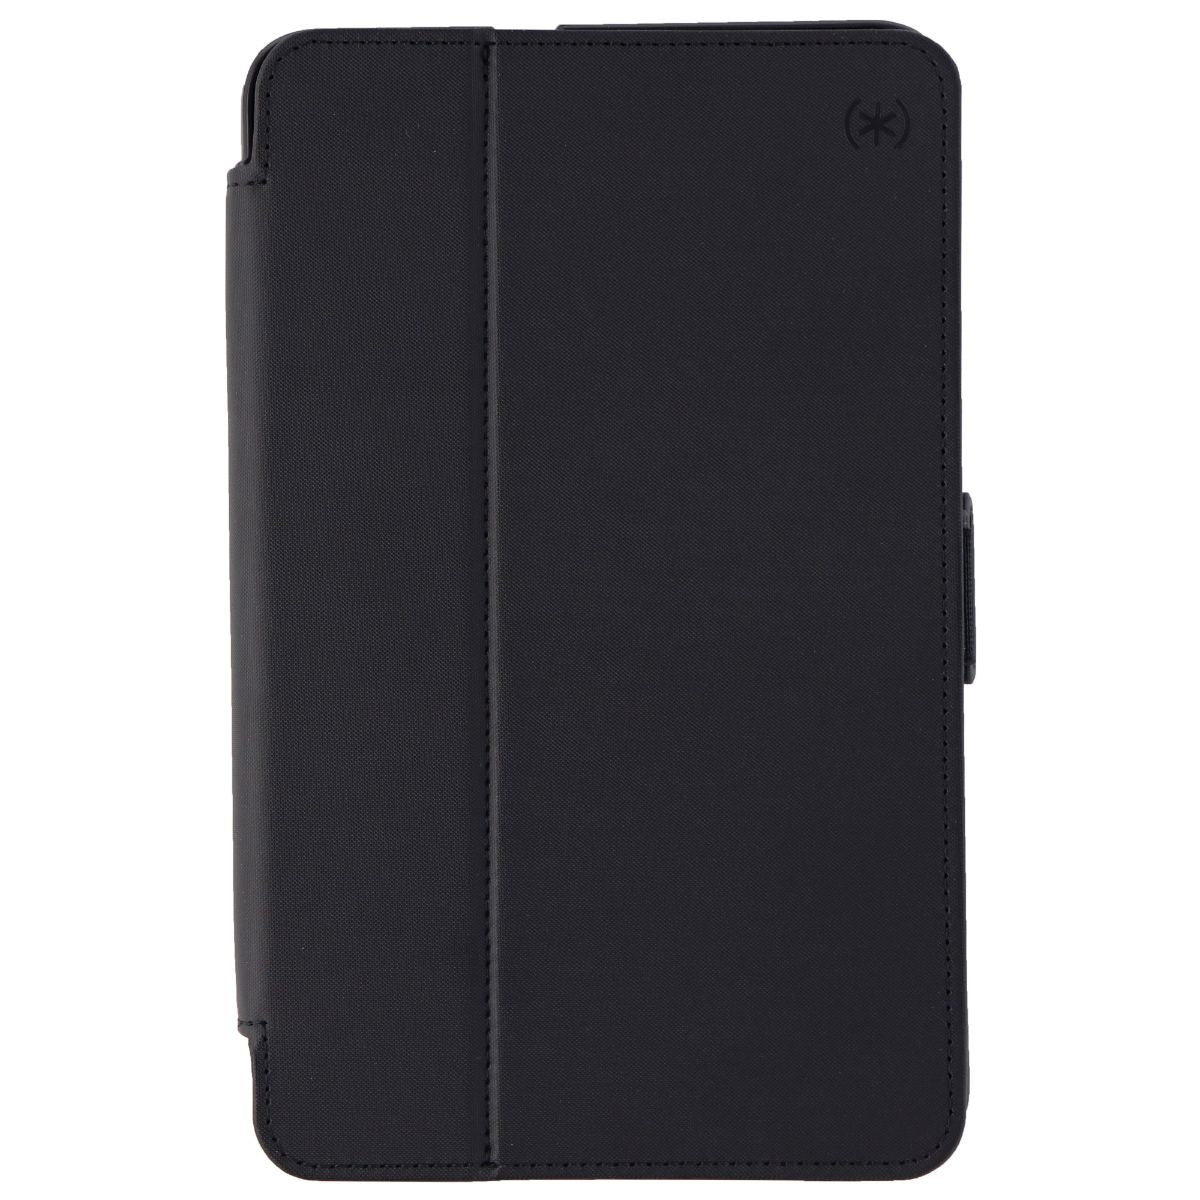 Speck Balance Folio Series Hard Case for Samsung Tab A 8.0 (2018) - Black iPad/Tablet Accessories - Cases, Covers, Keyboard Folios Speck    - Simple Cell Bulk Wholesale Pricing - USA Seller